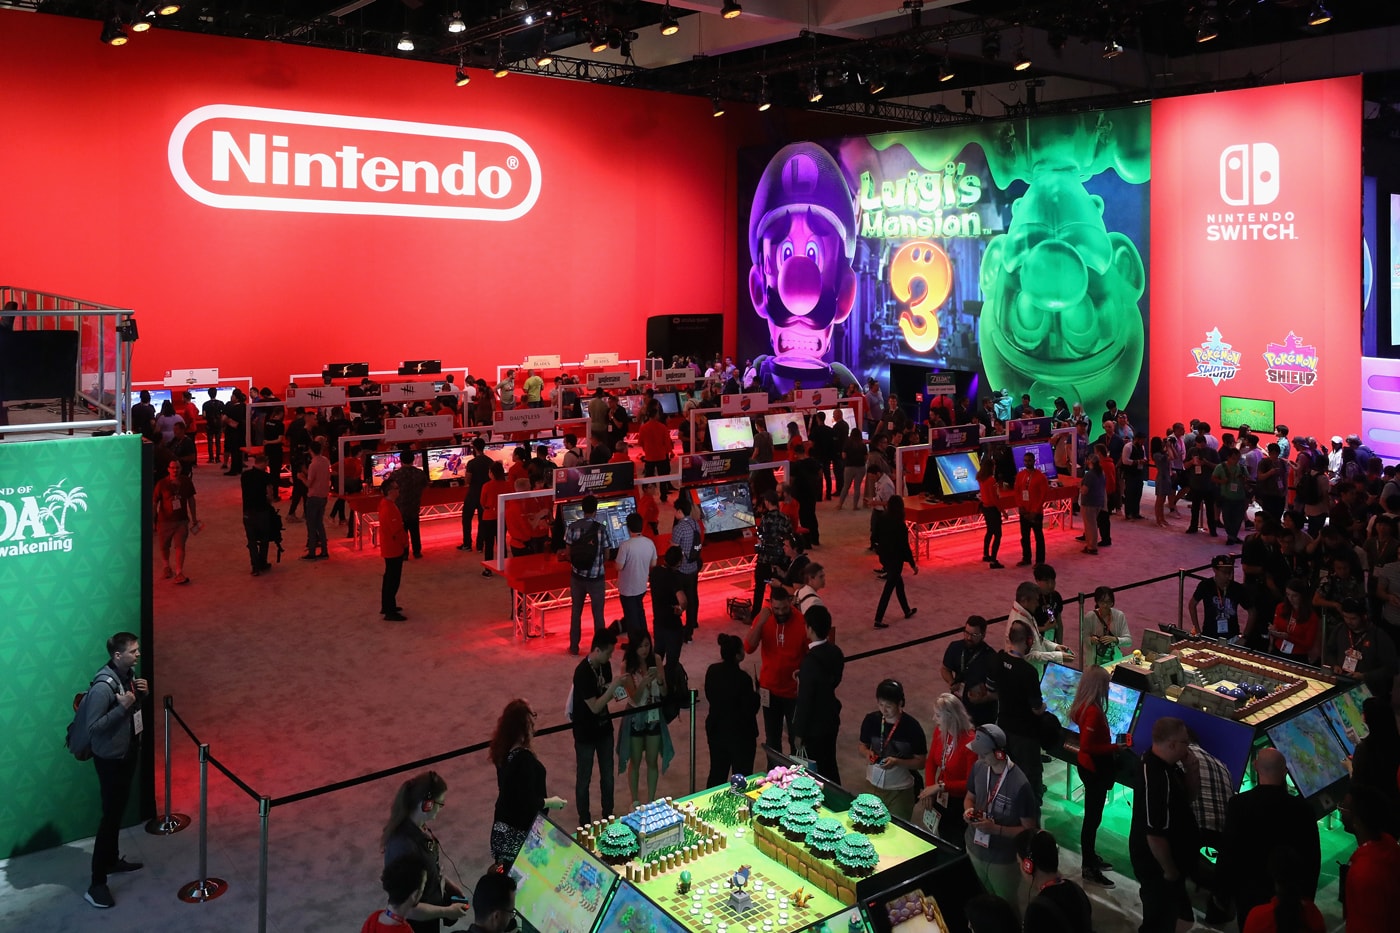 Nintendo E3 2019 Roundup The Legend of Zelda: Breath of the Wild super smash bros ultimate Link’s Awakening Cadence of Hyrule Luigi’s Mansion 3 Daemon X Machina No More Heroes 3  Pokémon Sword And Shield Dragon Quest XI S: Definitive Edition Witcher 3 Resident Evil 5 6 Contra: Rogue Corps  Panzer Dragoon Dark Crystal  Empire Of Sin Mario & Sonic at the Tokyo Olympics Dead By Daylight 